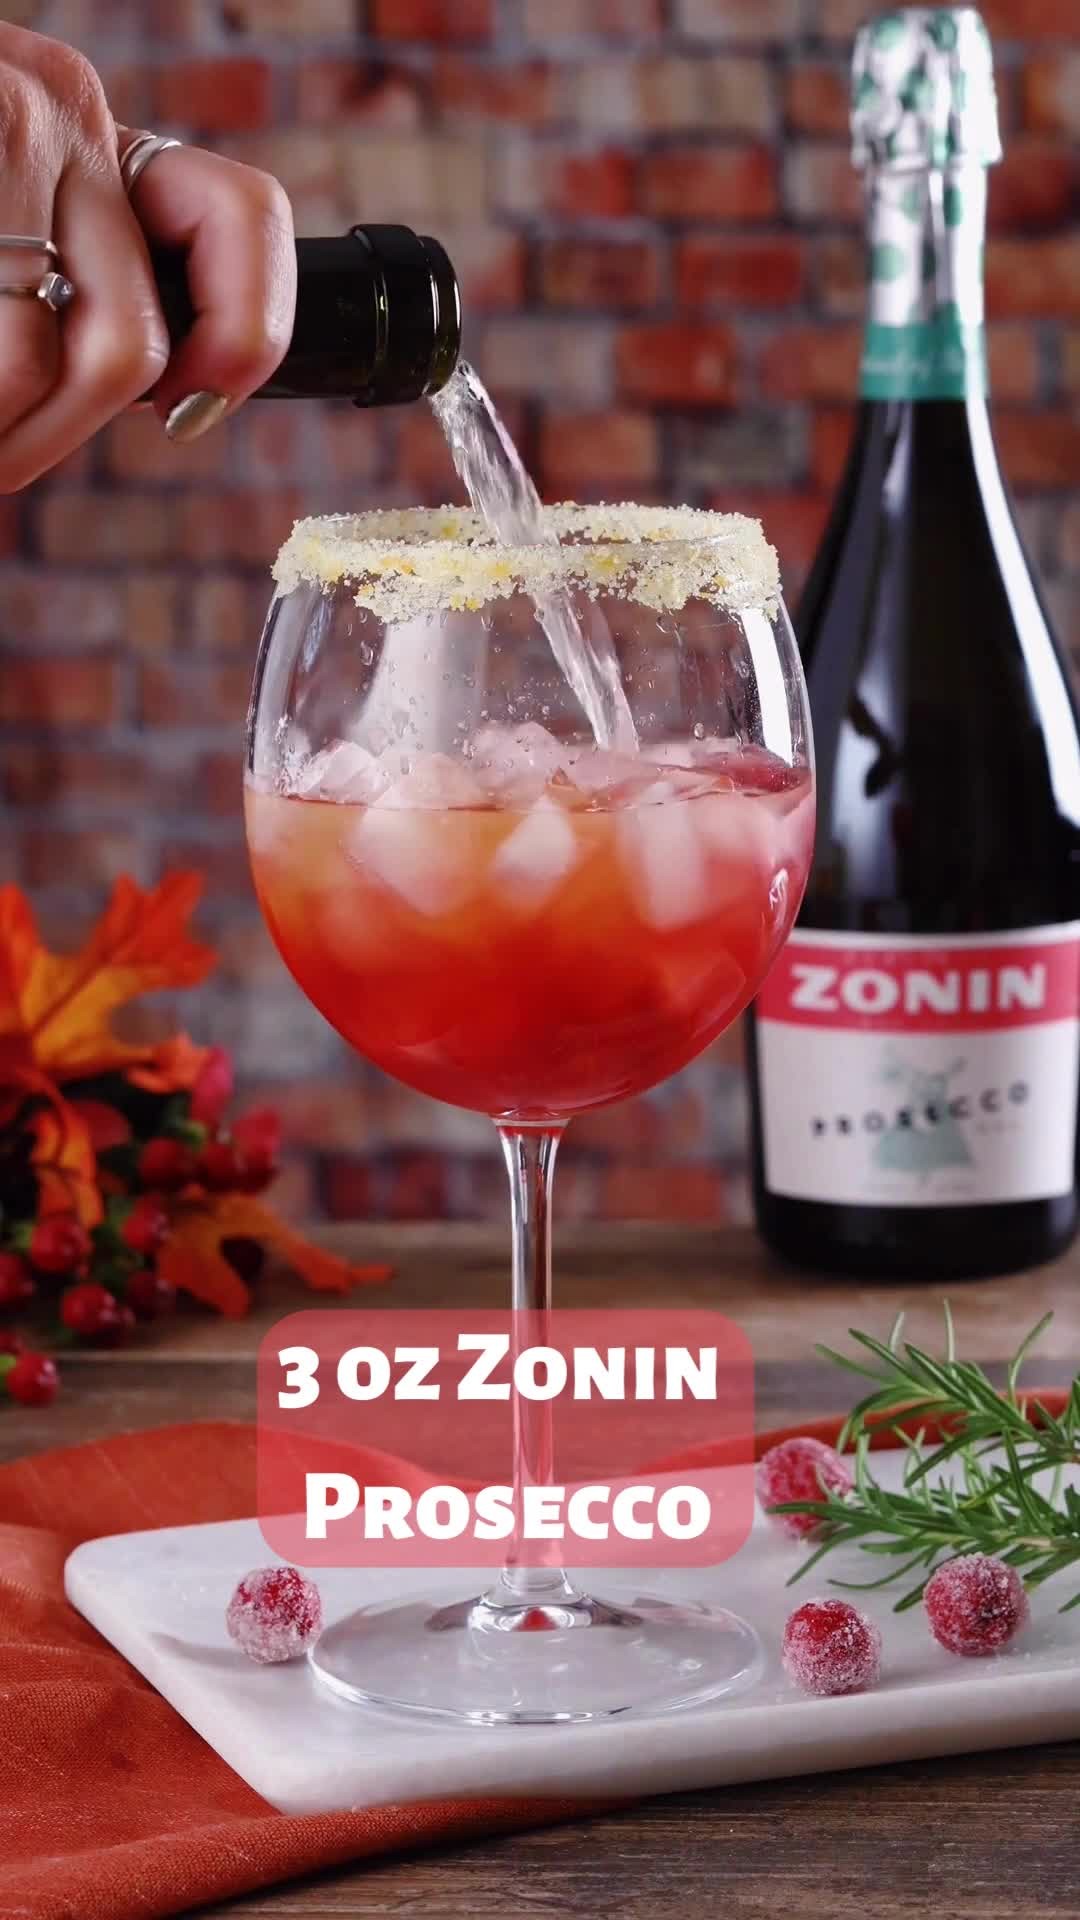 Thanksgiving Cranberry Spritz is THE perfect recipe of the season to add to any celebration! Whether you're celebrating #Friendsgiving or #Thanksgiving @the.sauceress has a recipe you've gotta try!
.
.
Ingredients: 
3 oz Zonin Prosecco
.75 oz Grand Marnier
.5 oz Gin or Vodka (optional, for a stronger cocktail)
2 oz Cranberry Juice
1 oz Ginger Ale
Squeeze Orange Juice
Squeeze Lime Juice
3 Dashes Orange Bitters